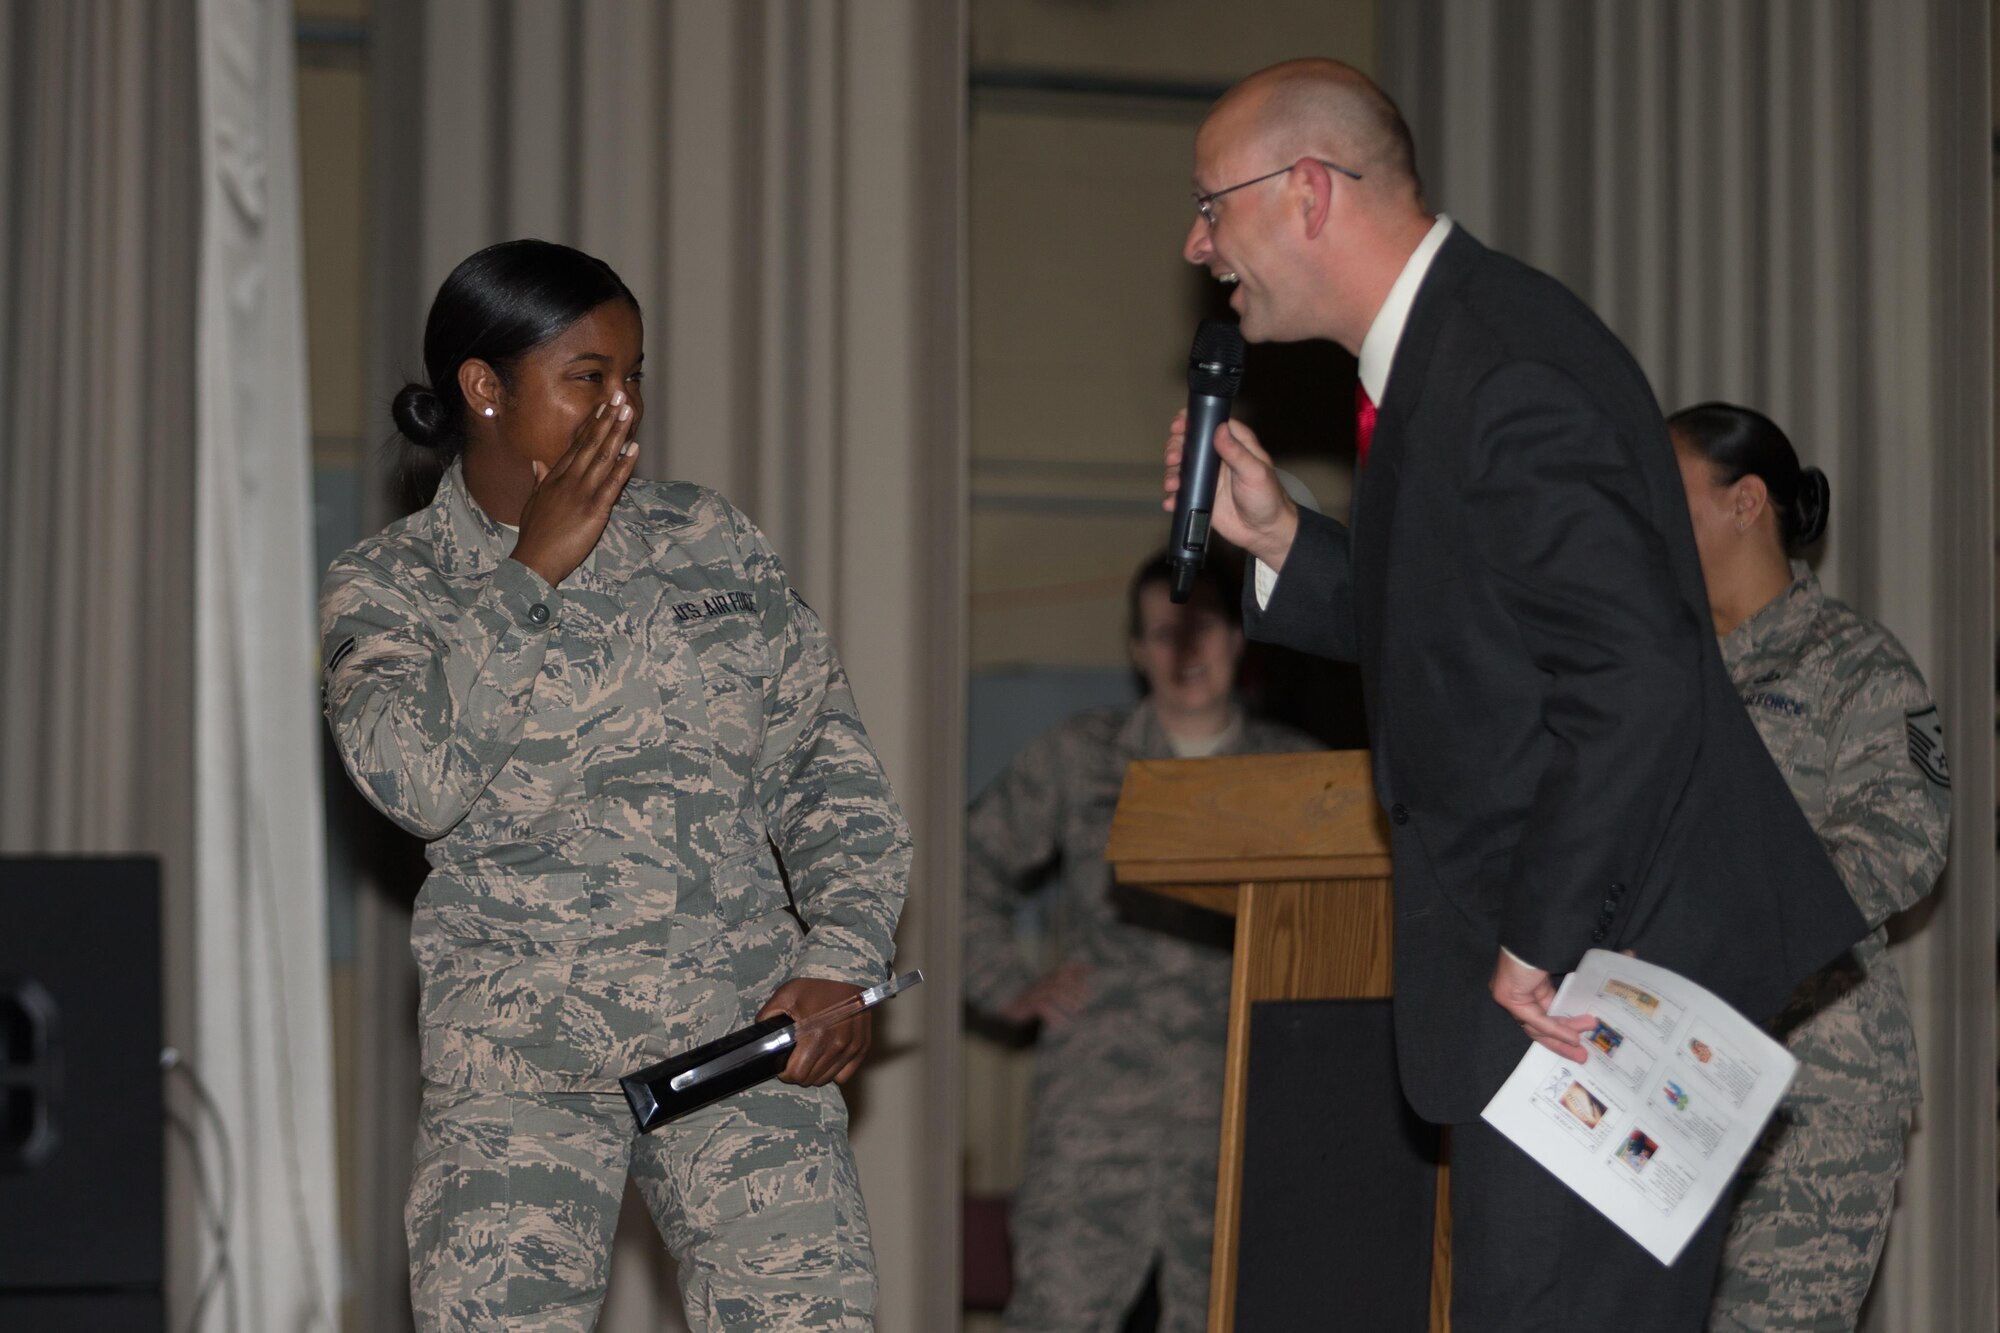 Airman 1st Class Latoya Person, 412th Maintenance Group, gets to play a game like on “The Price is Right” game show at the 412th Test Wing First Quarter Award Ceremony May 16 at the base theater.  The game show host was Senior Master Sgt. Deshan Woods, 412th Security Forces Squadron. (U.S. Air Force photo by Don Allen)
